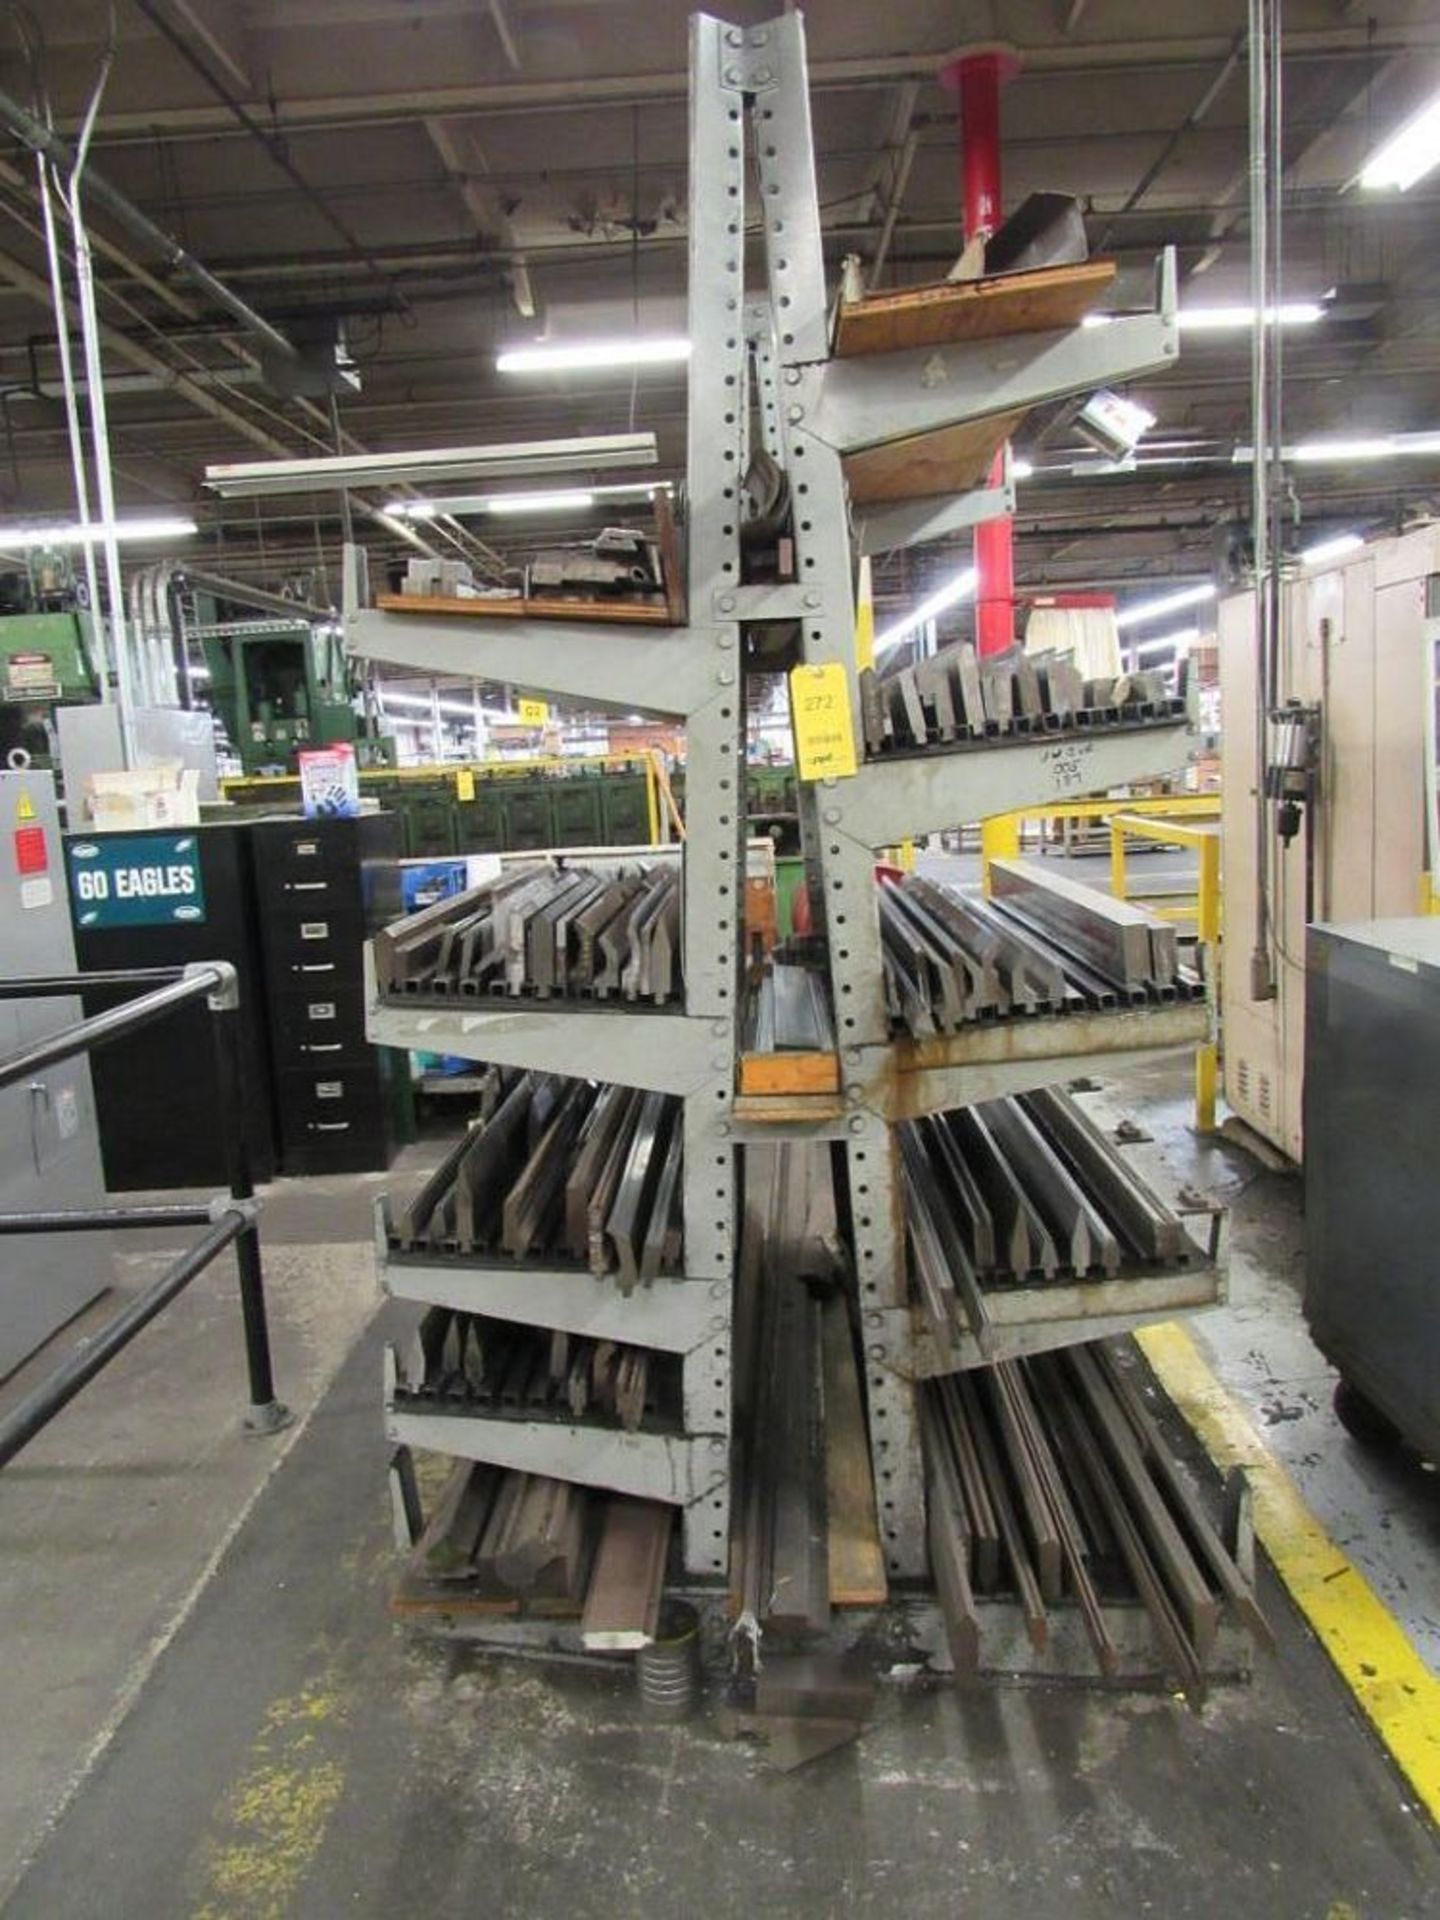 LOT: Assorted Press Brake Dies on A-Frame Rack (with rack) (Location D)